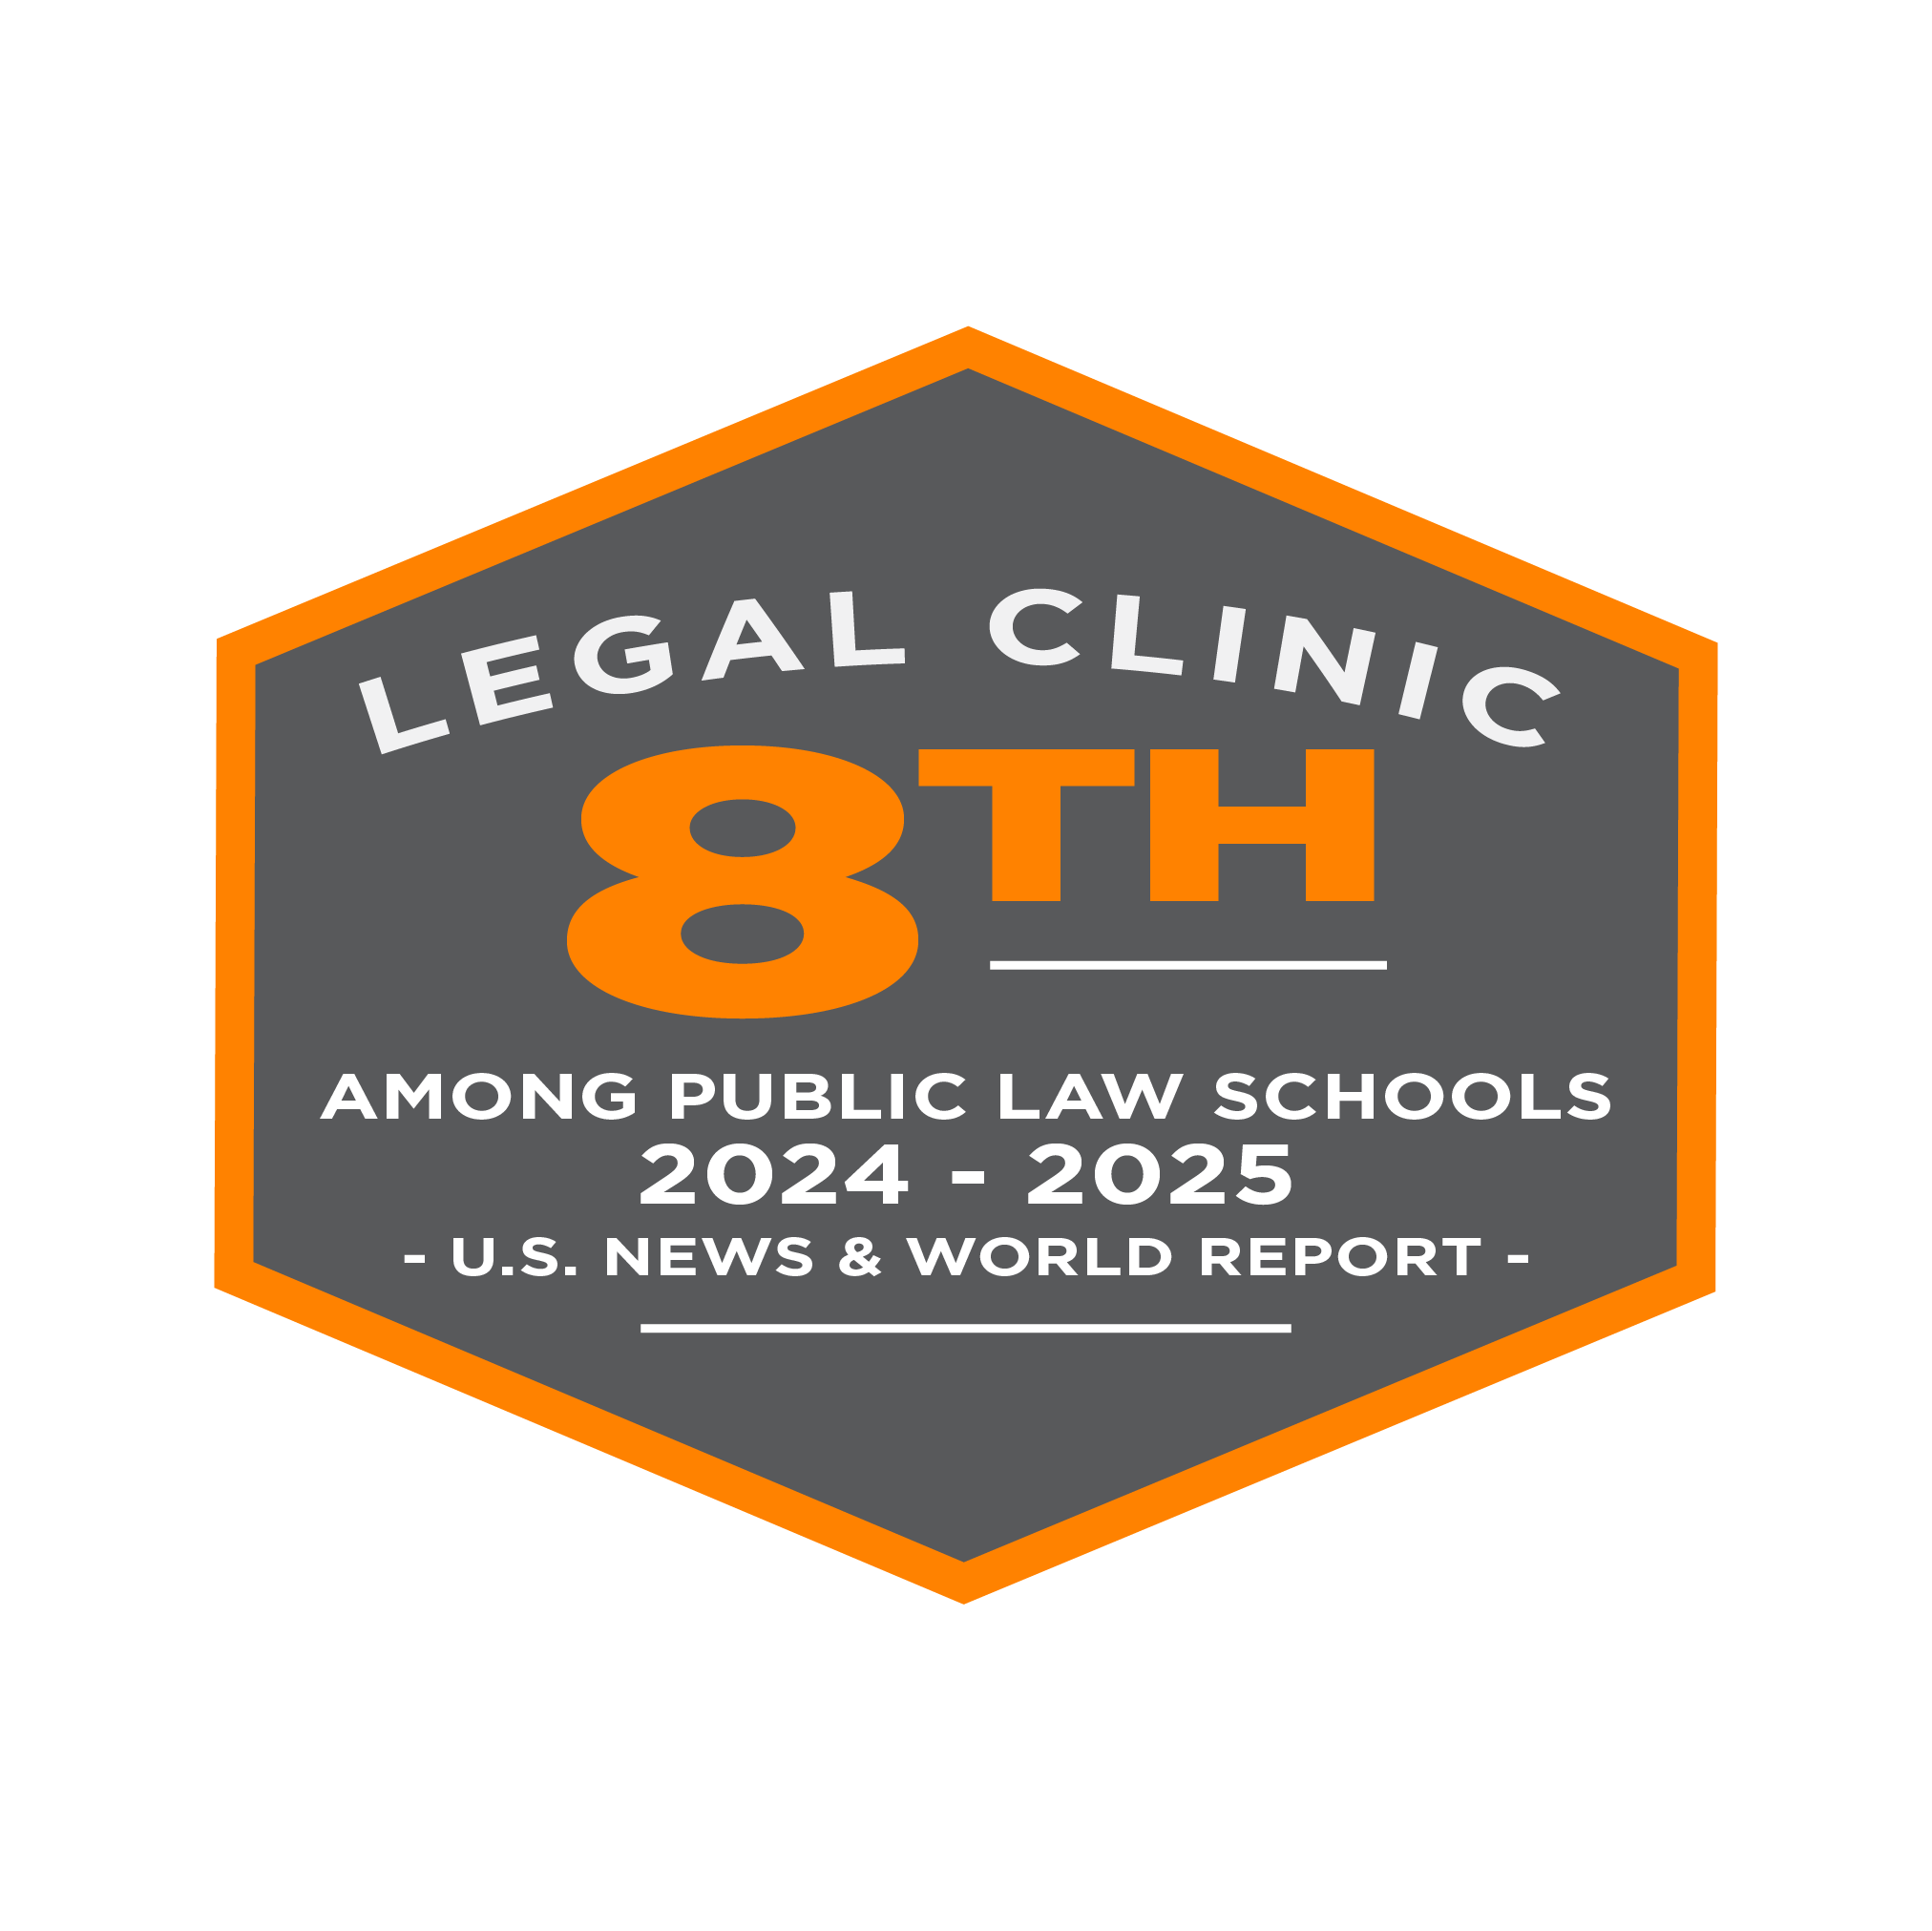 Ranked 8th - Legal Clinic - US News